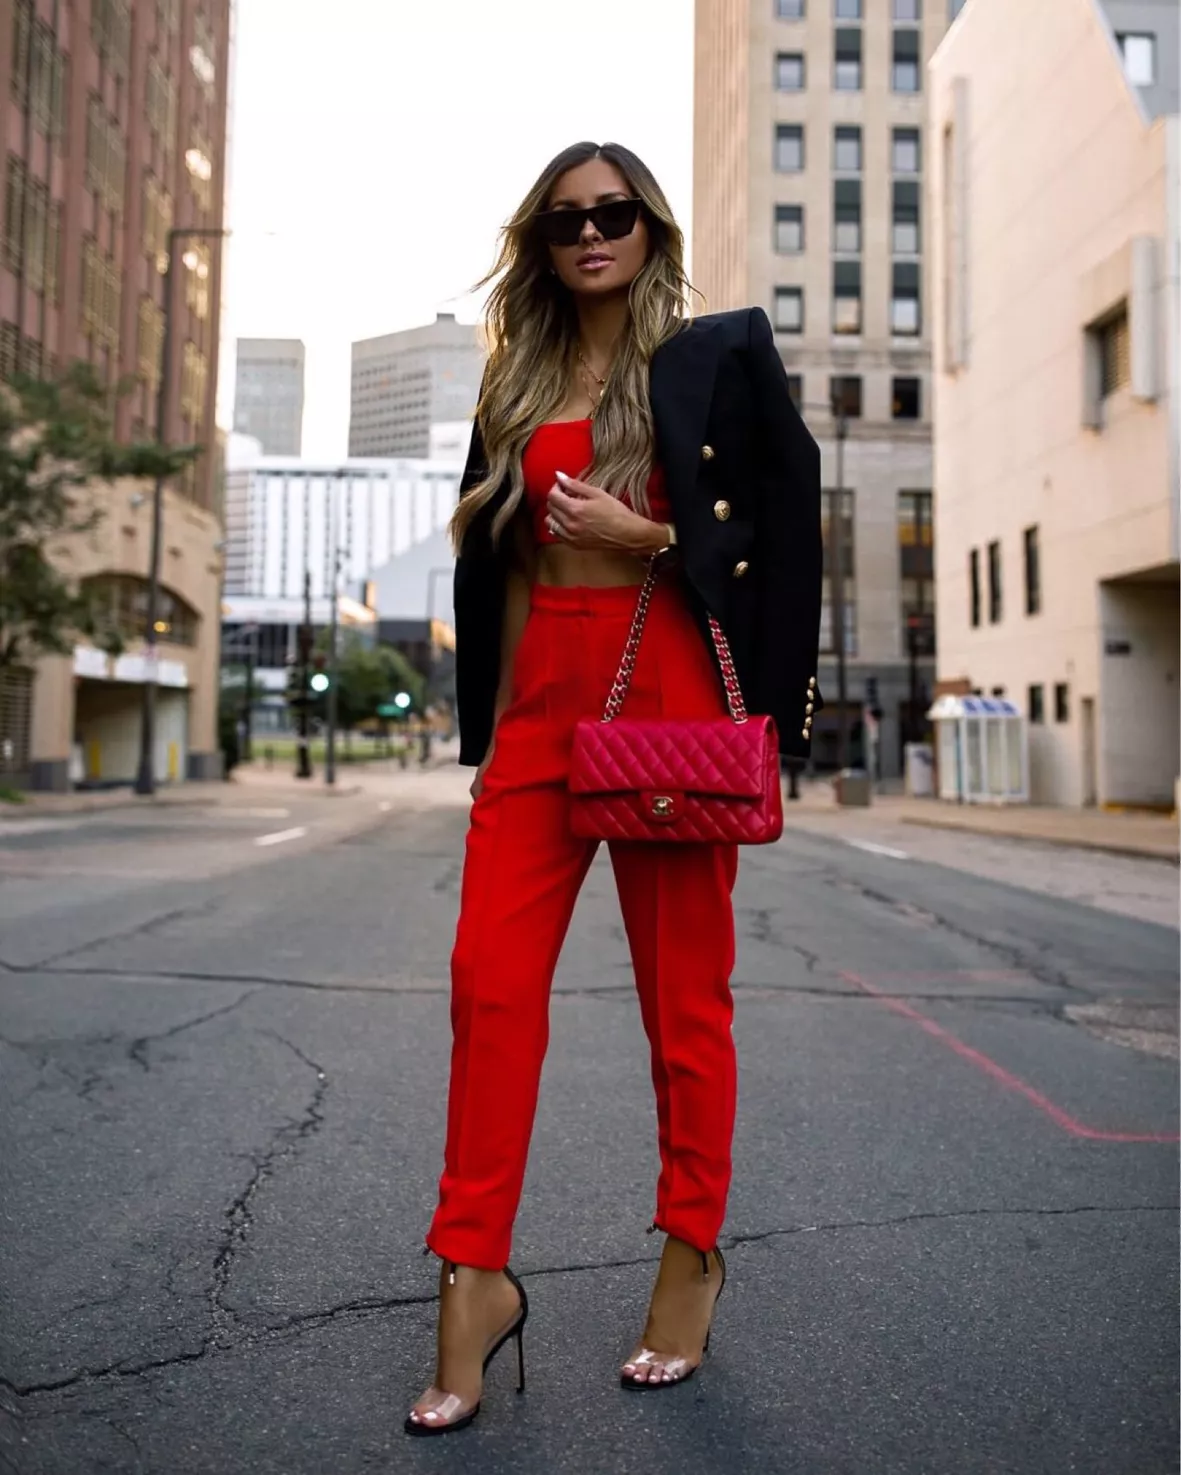 The Most Stylish Outfits to Wear on Valentine's Day - Mia Mia Mine